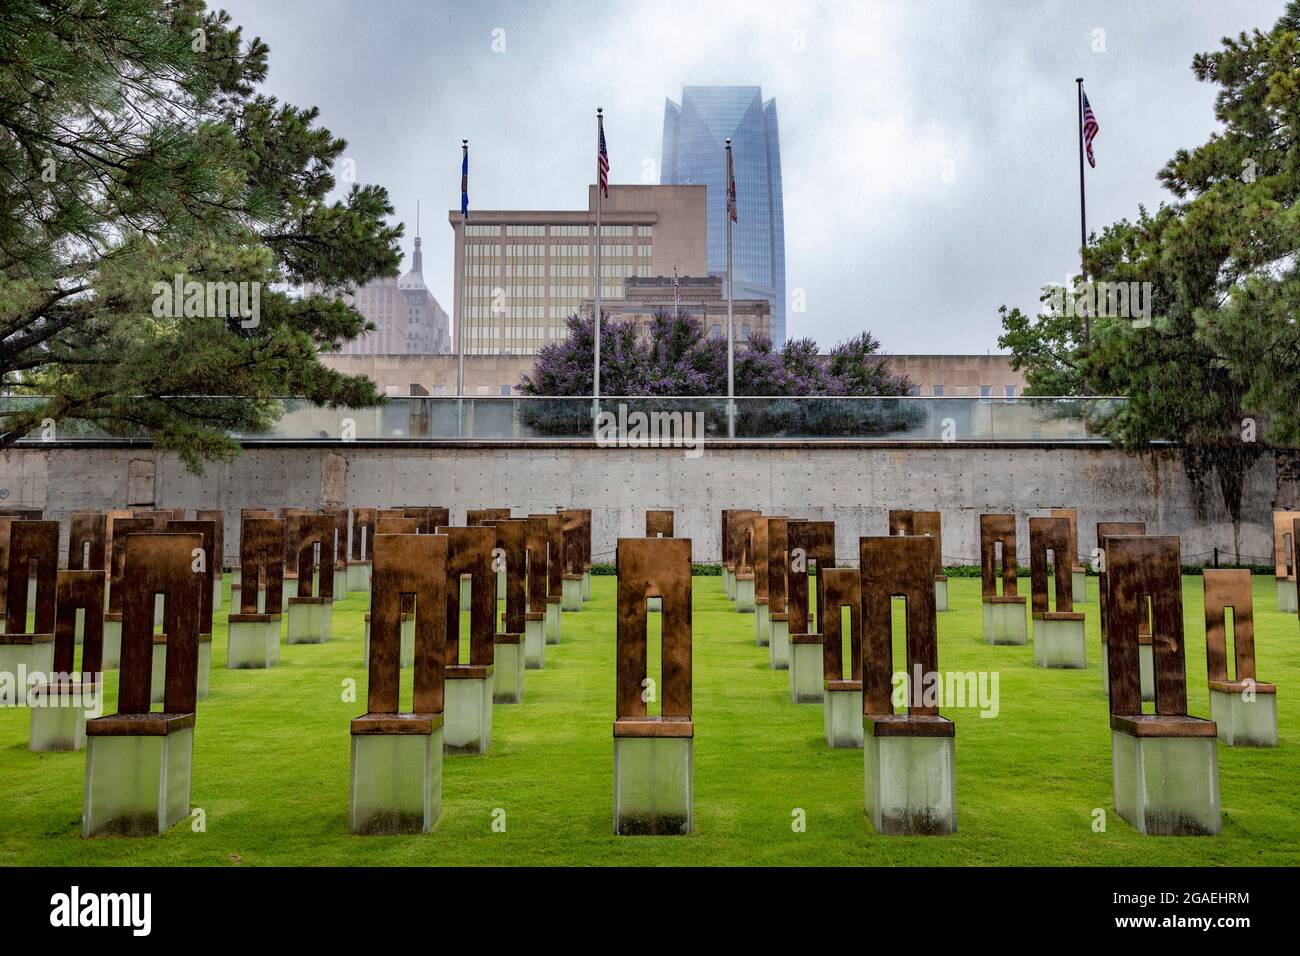 Oklahoma City, Oklahoma - The Oklahoma City National Memorial marks the 1995 domestic terror bombing that destroyed the Alfred P. Murrah Federal Build Stock Photo